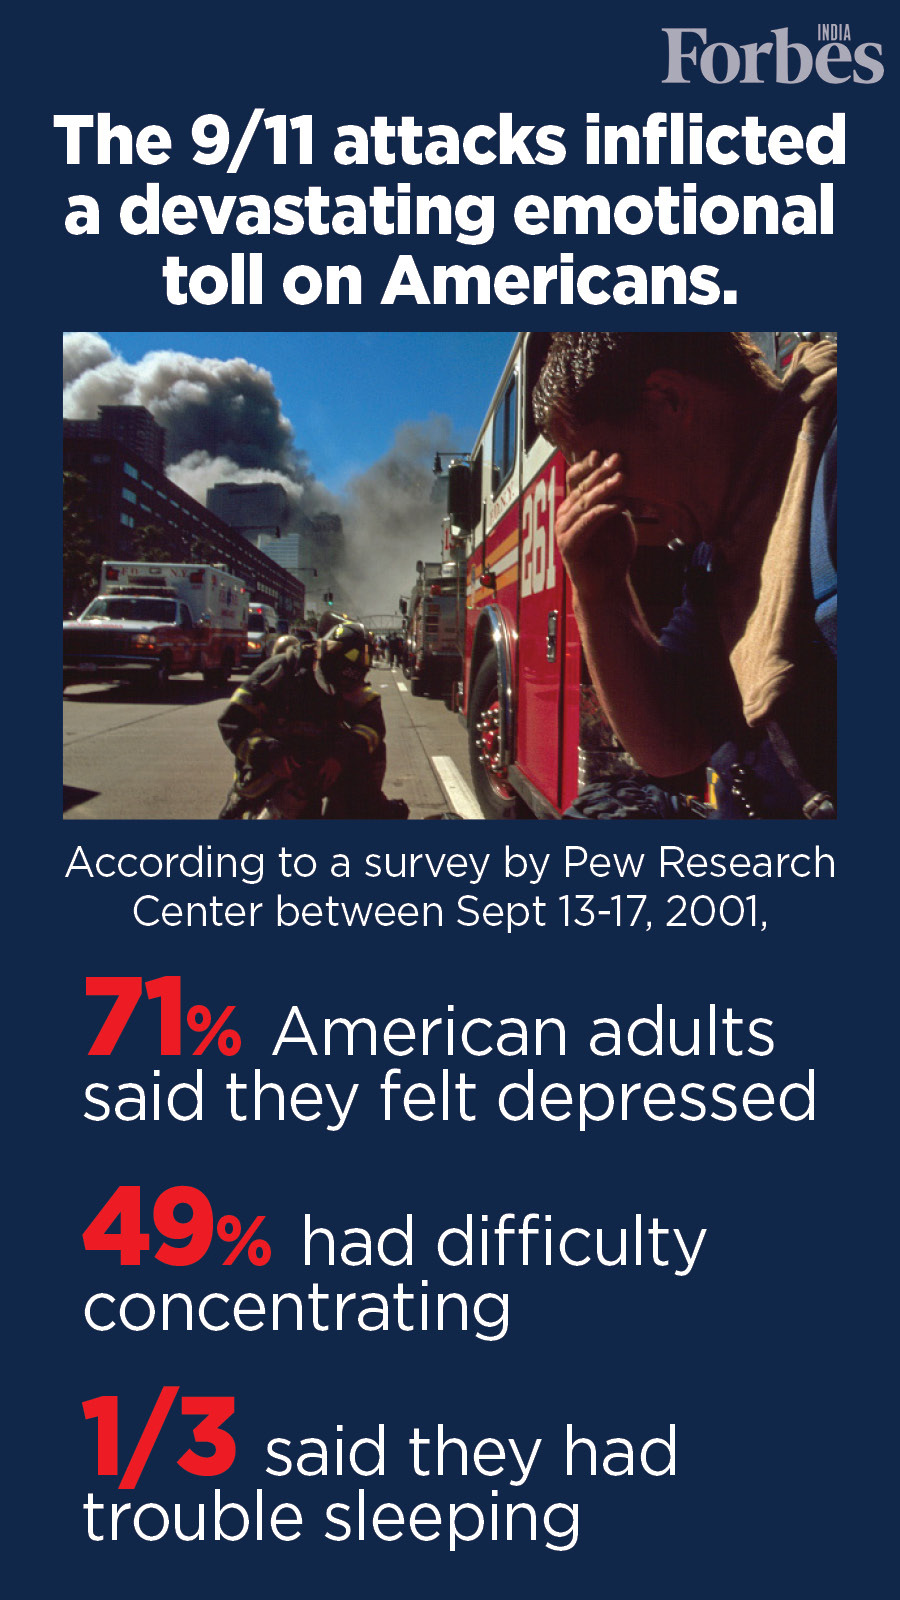 20 years of 9/11: Tracing a tragedy in numbers